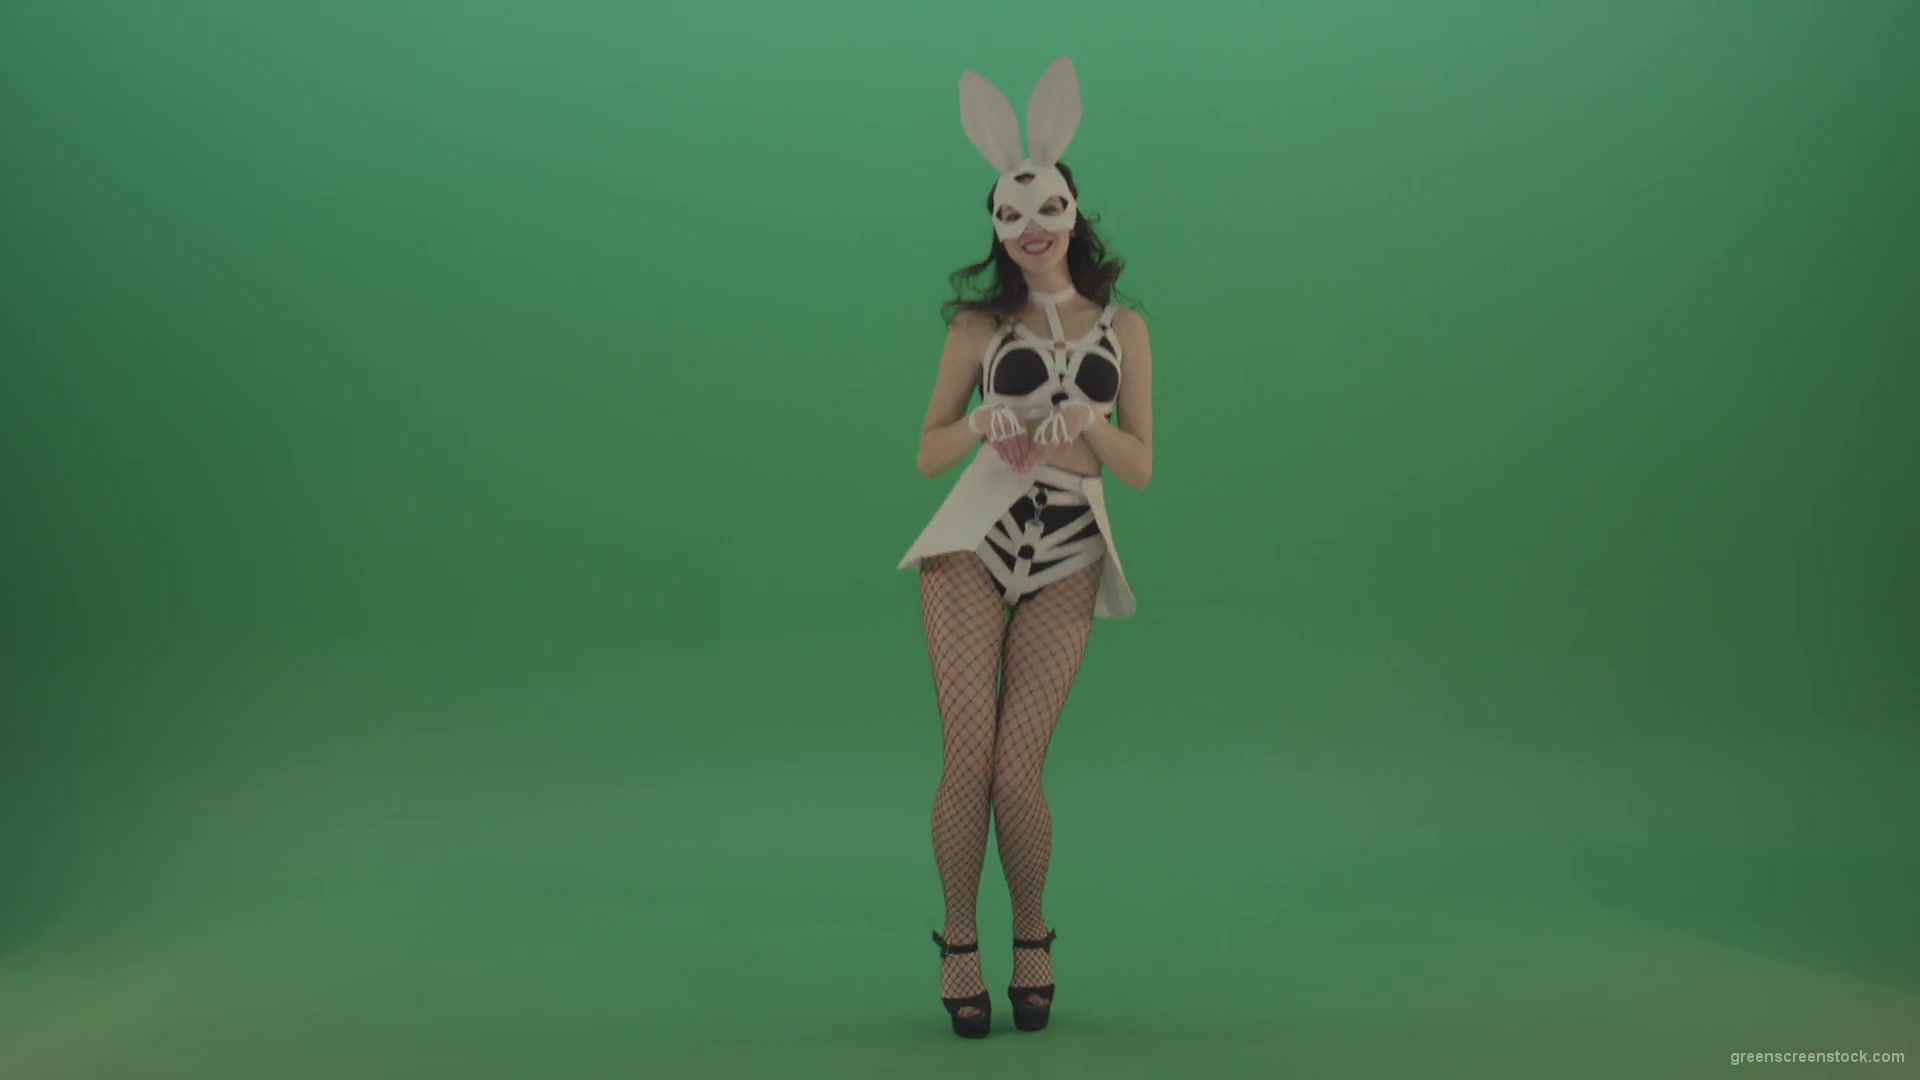 Happy-girl-dressed-in-rabbit-costume-for-adults-cyclically-jumping-in-different-directions-with-white-ears-on-chromakey-background-1920_006 Green Screen Stock